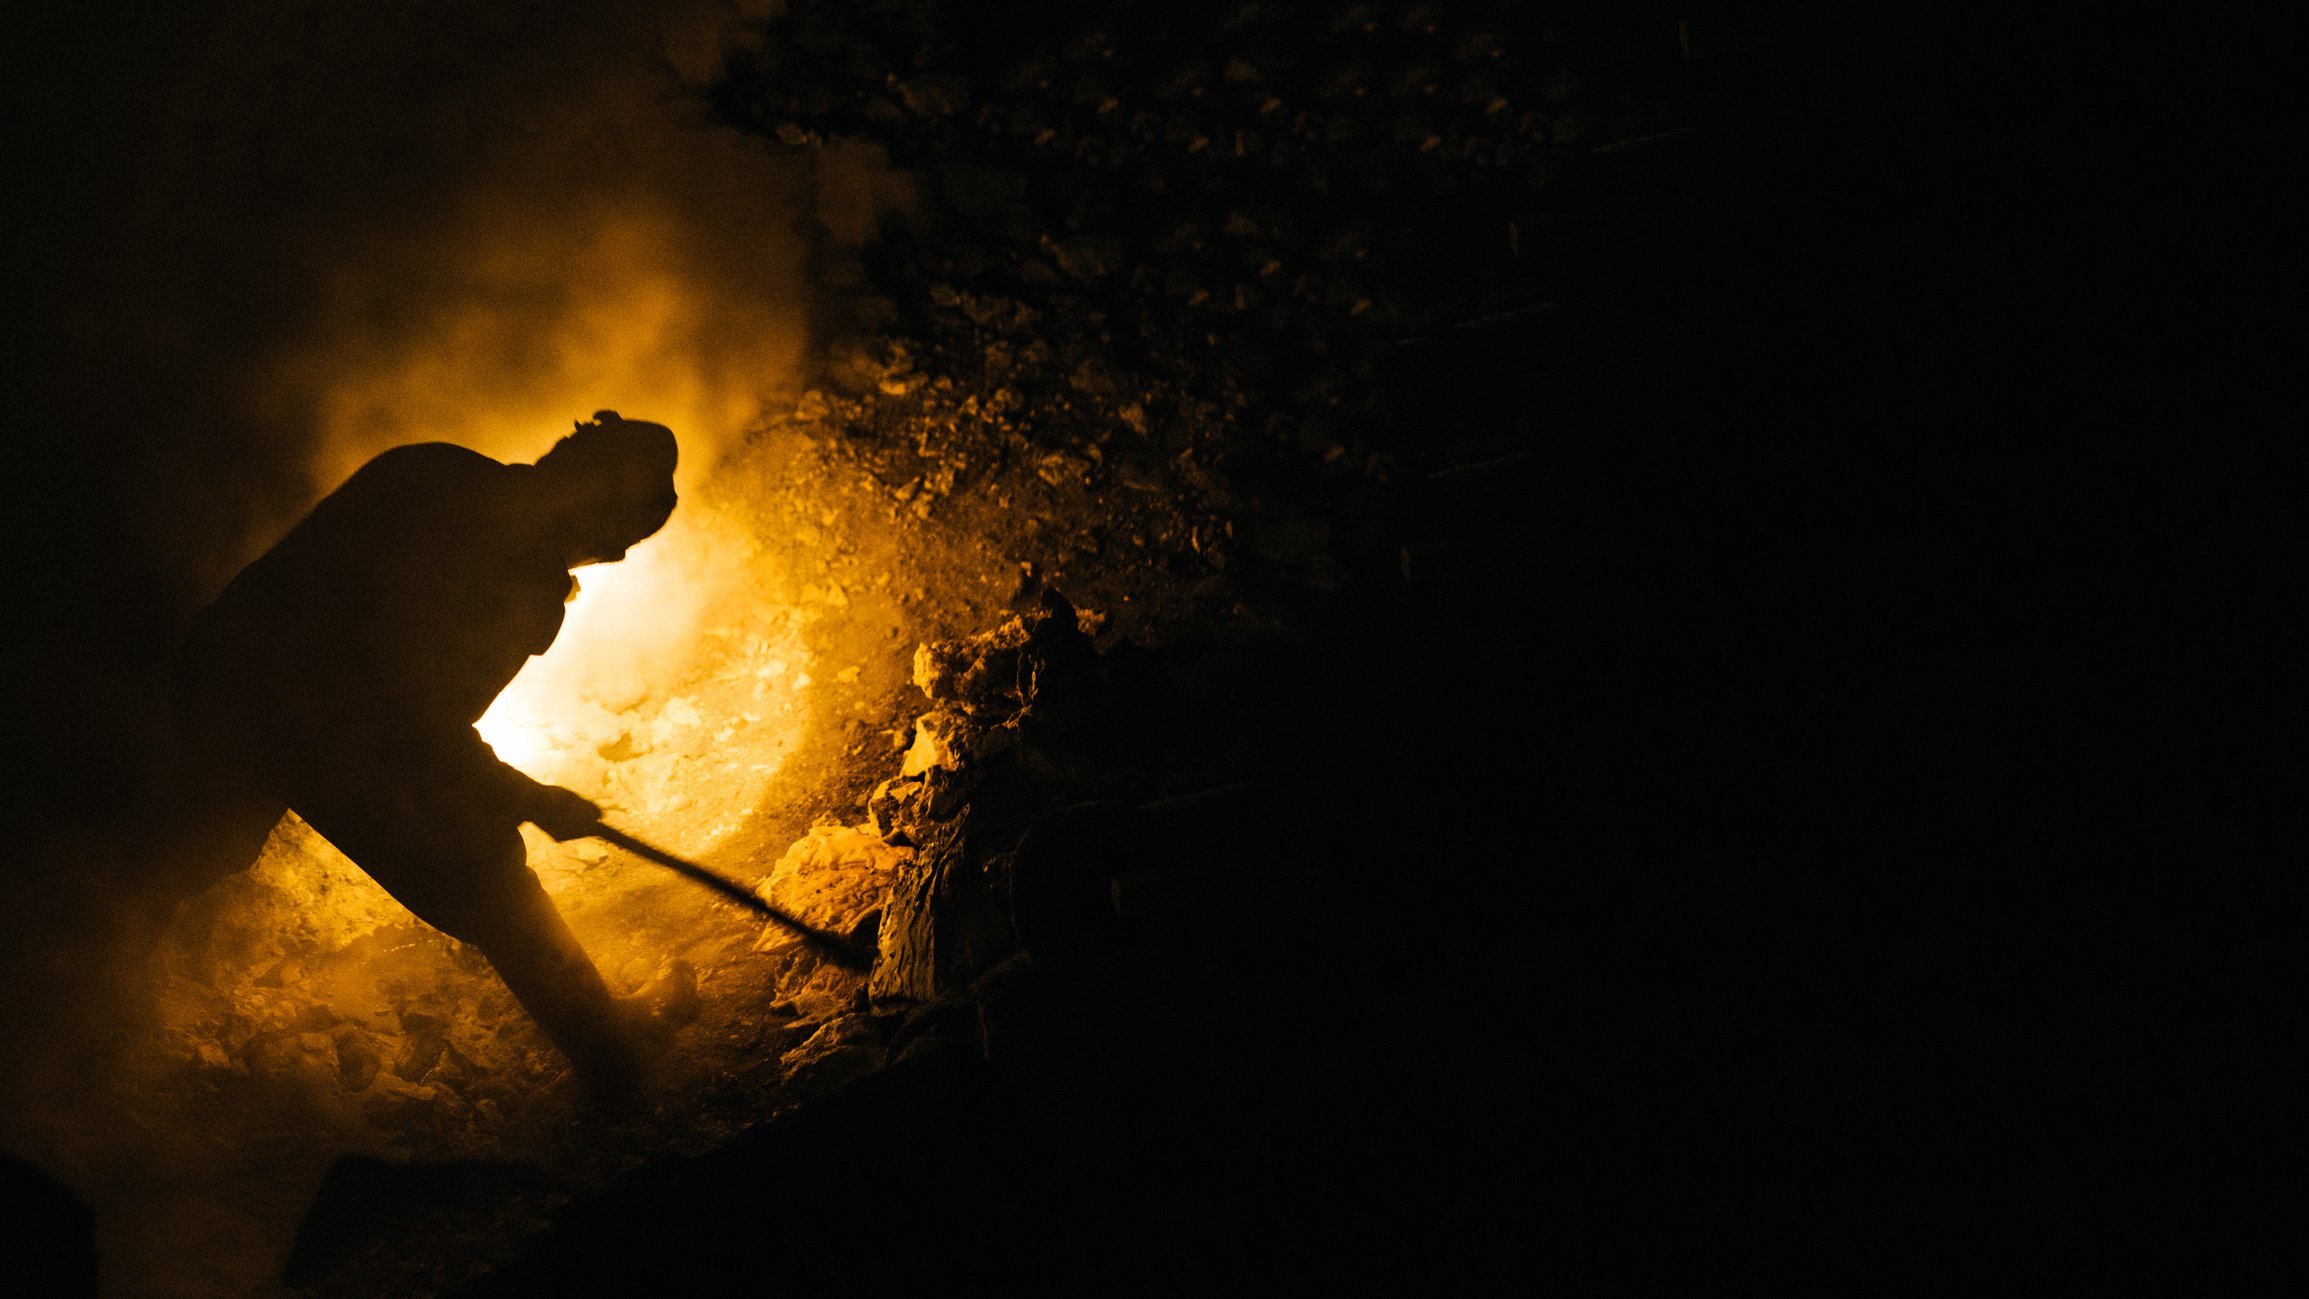 The silhouette of a miner digging